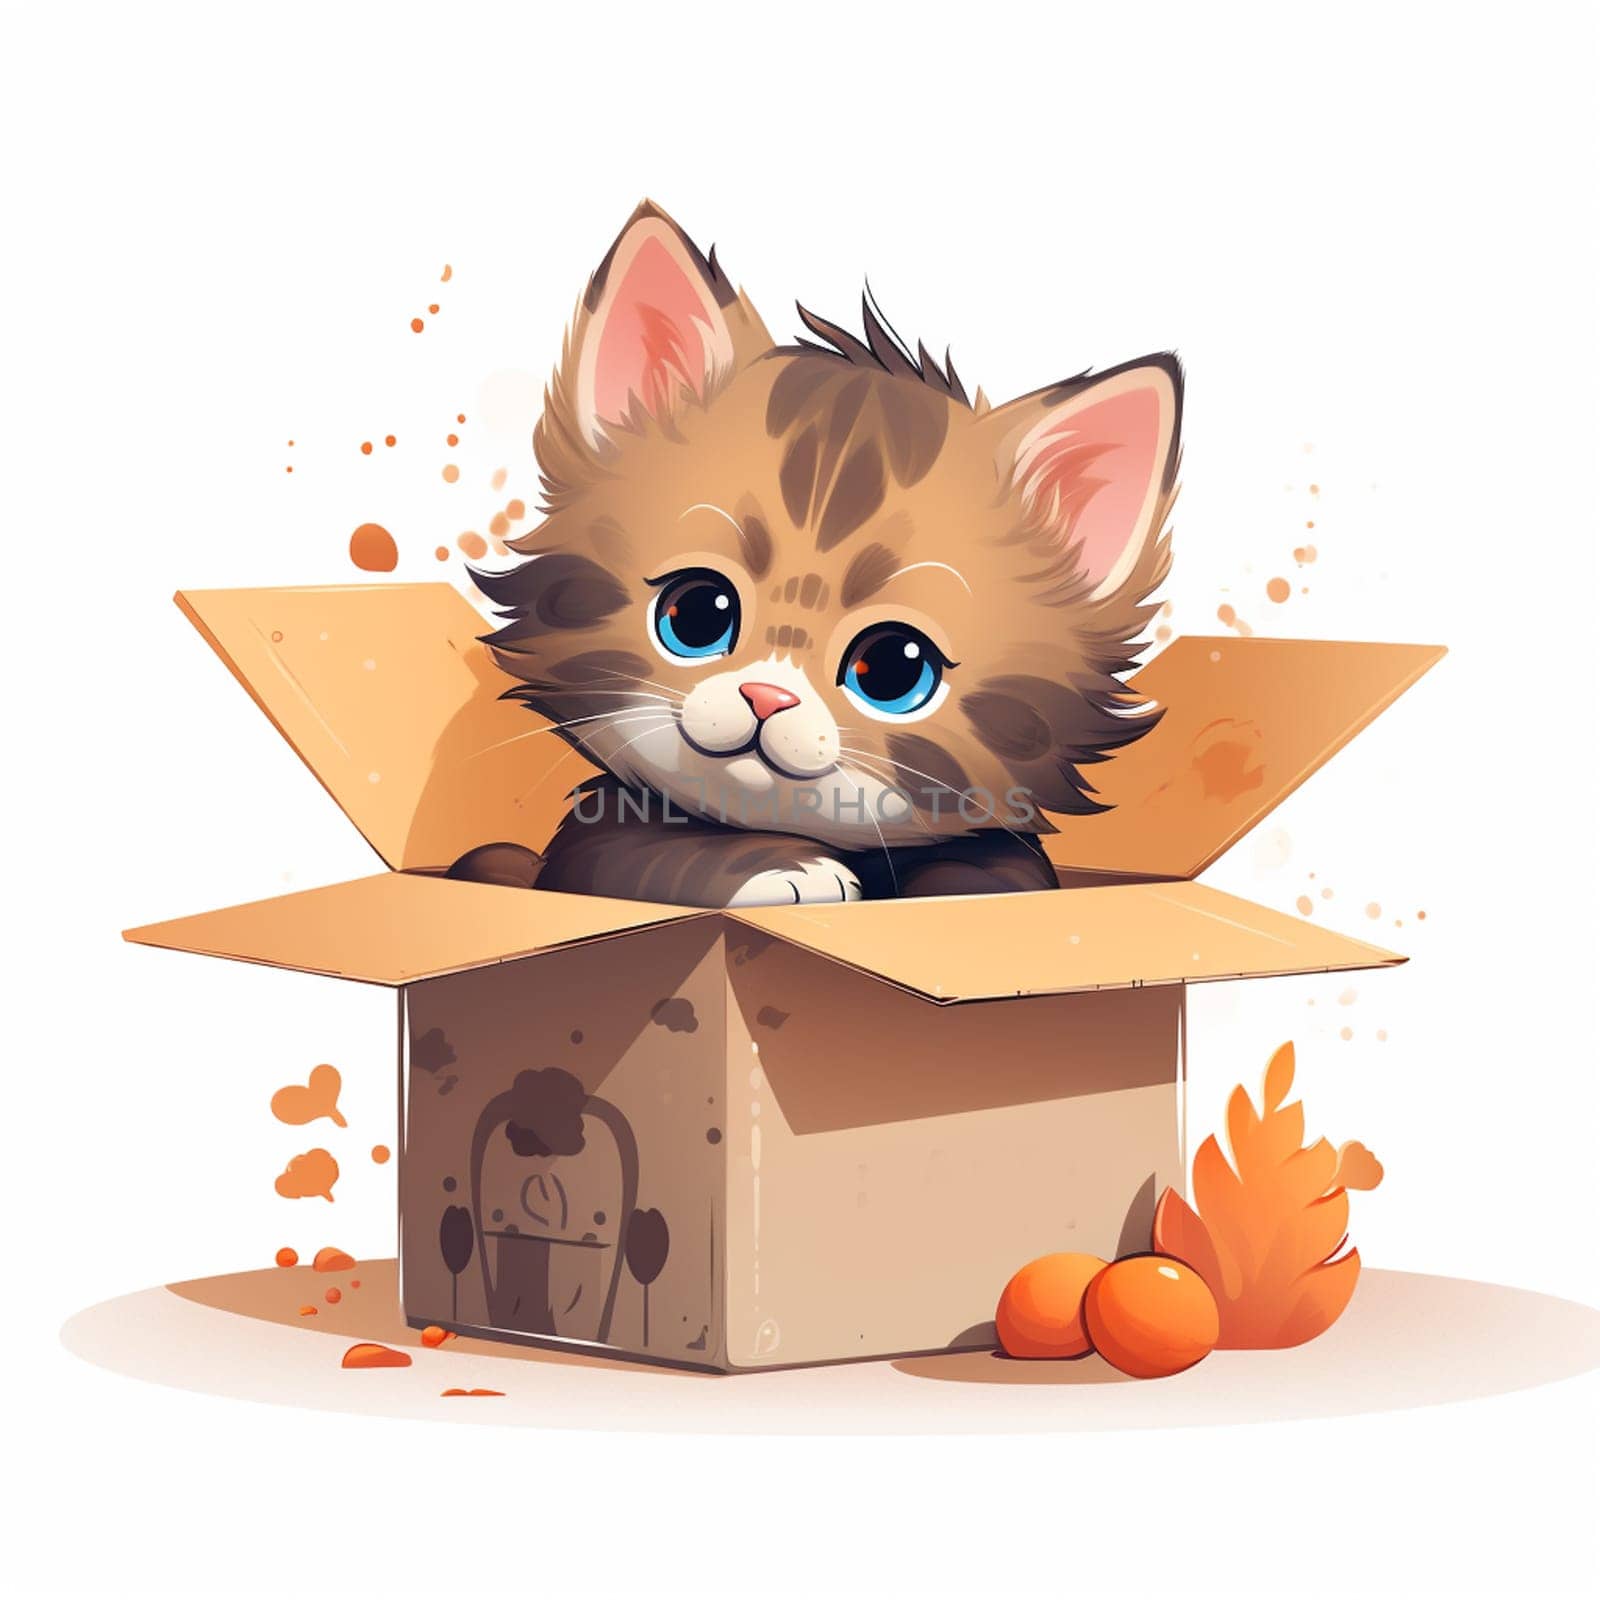 A cute and lovely cat in a carton box by Andelov13